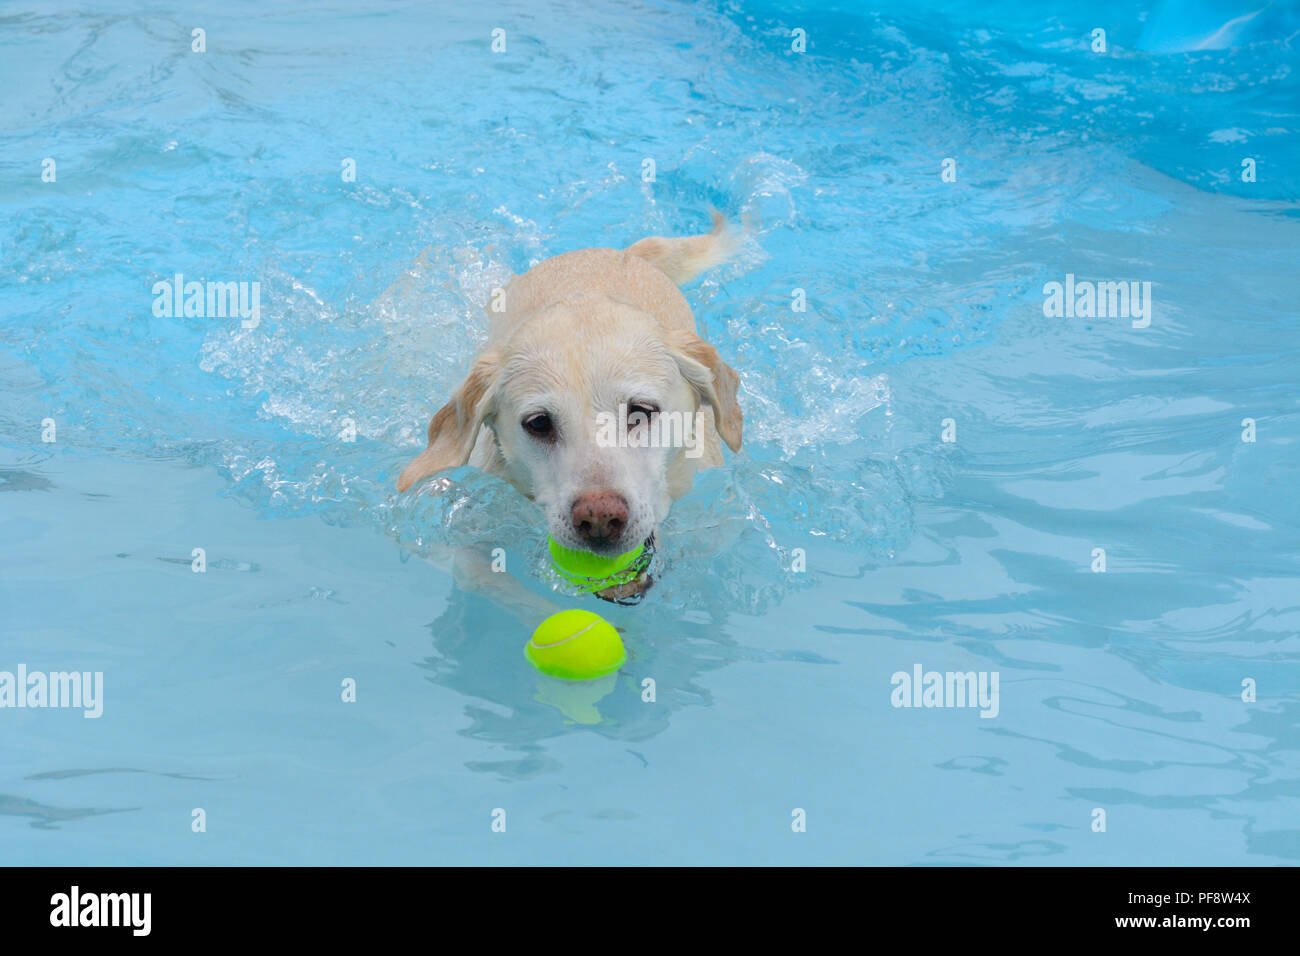 Golden labrador retriever mixed breed dog with tennis ball in mouth swimming to retrieve a second ball Stock Photo